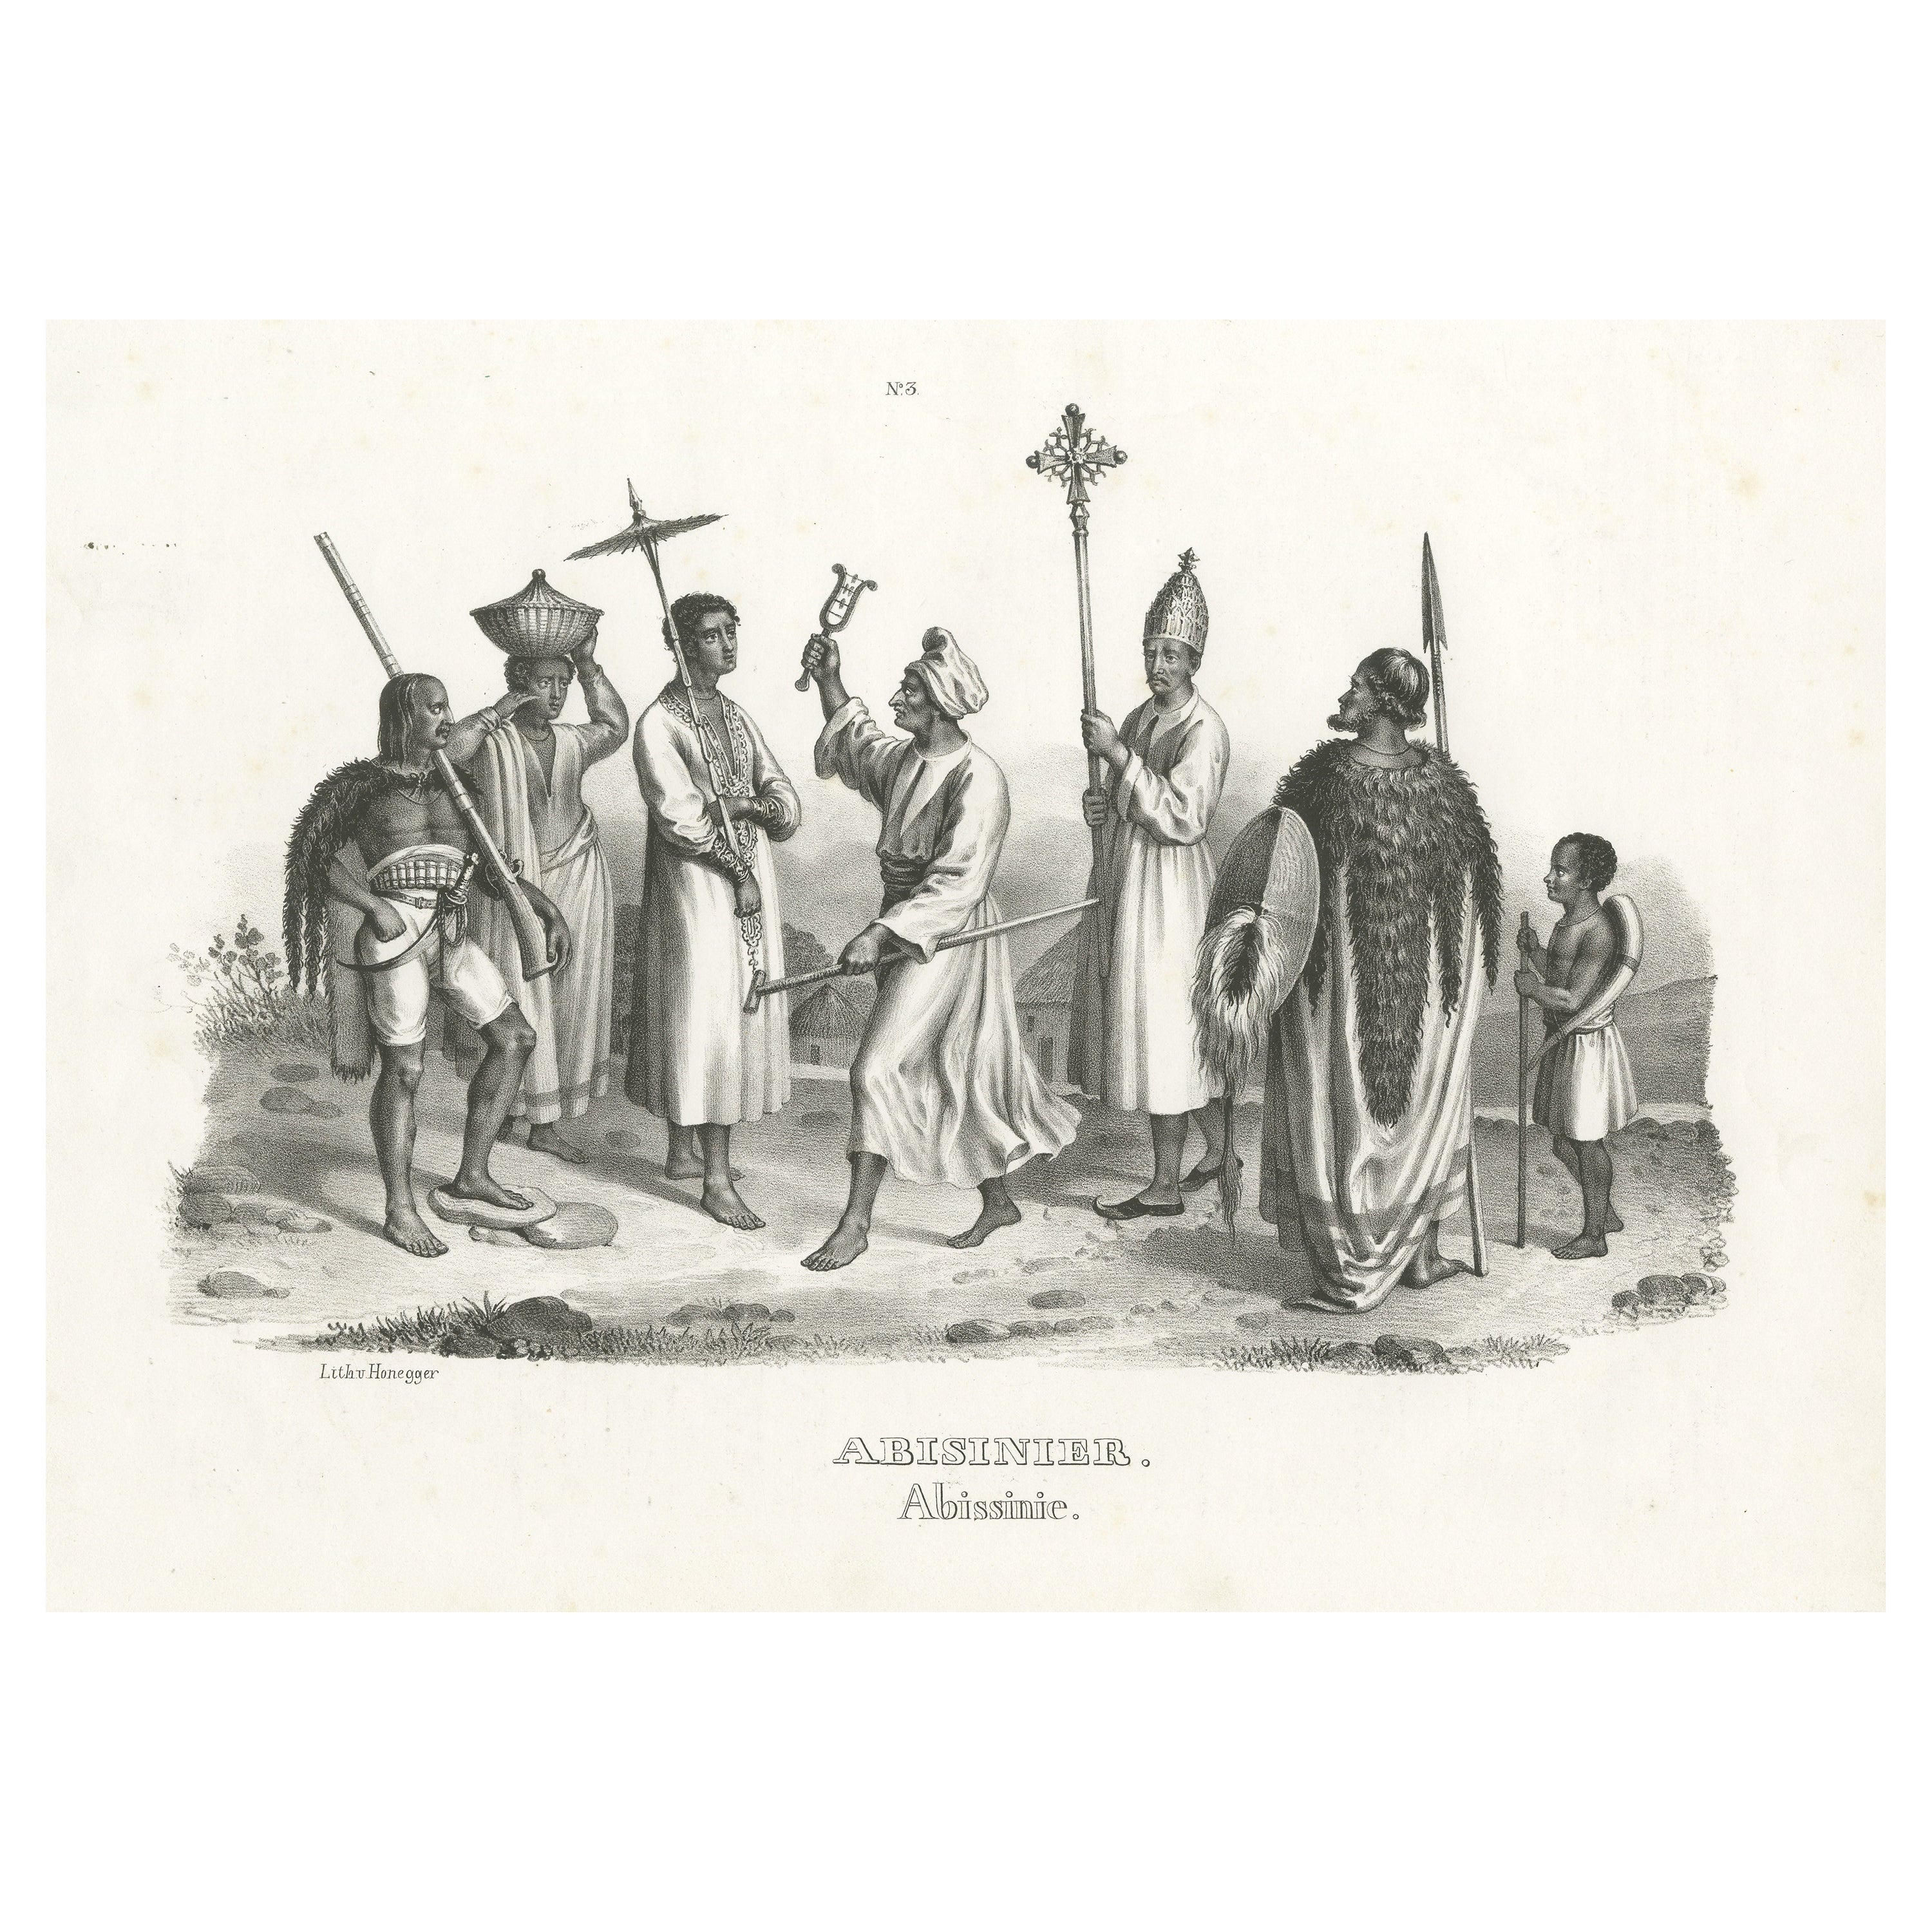 Antique Steel Engraved Print Showing Natives of Abyssinia, Ethiopia